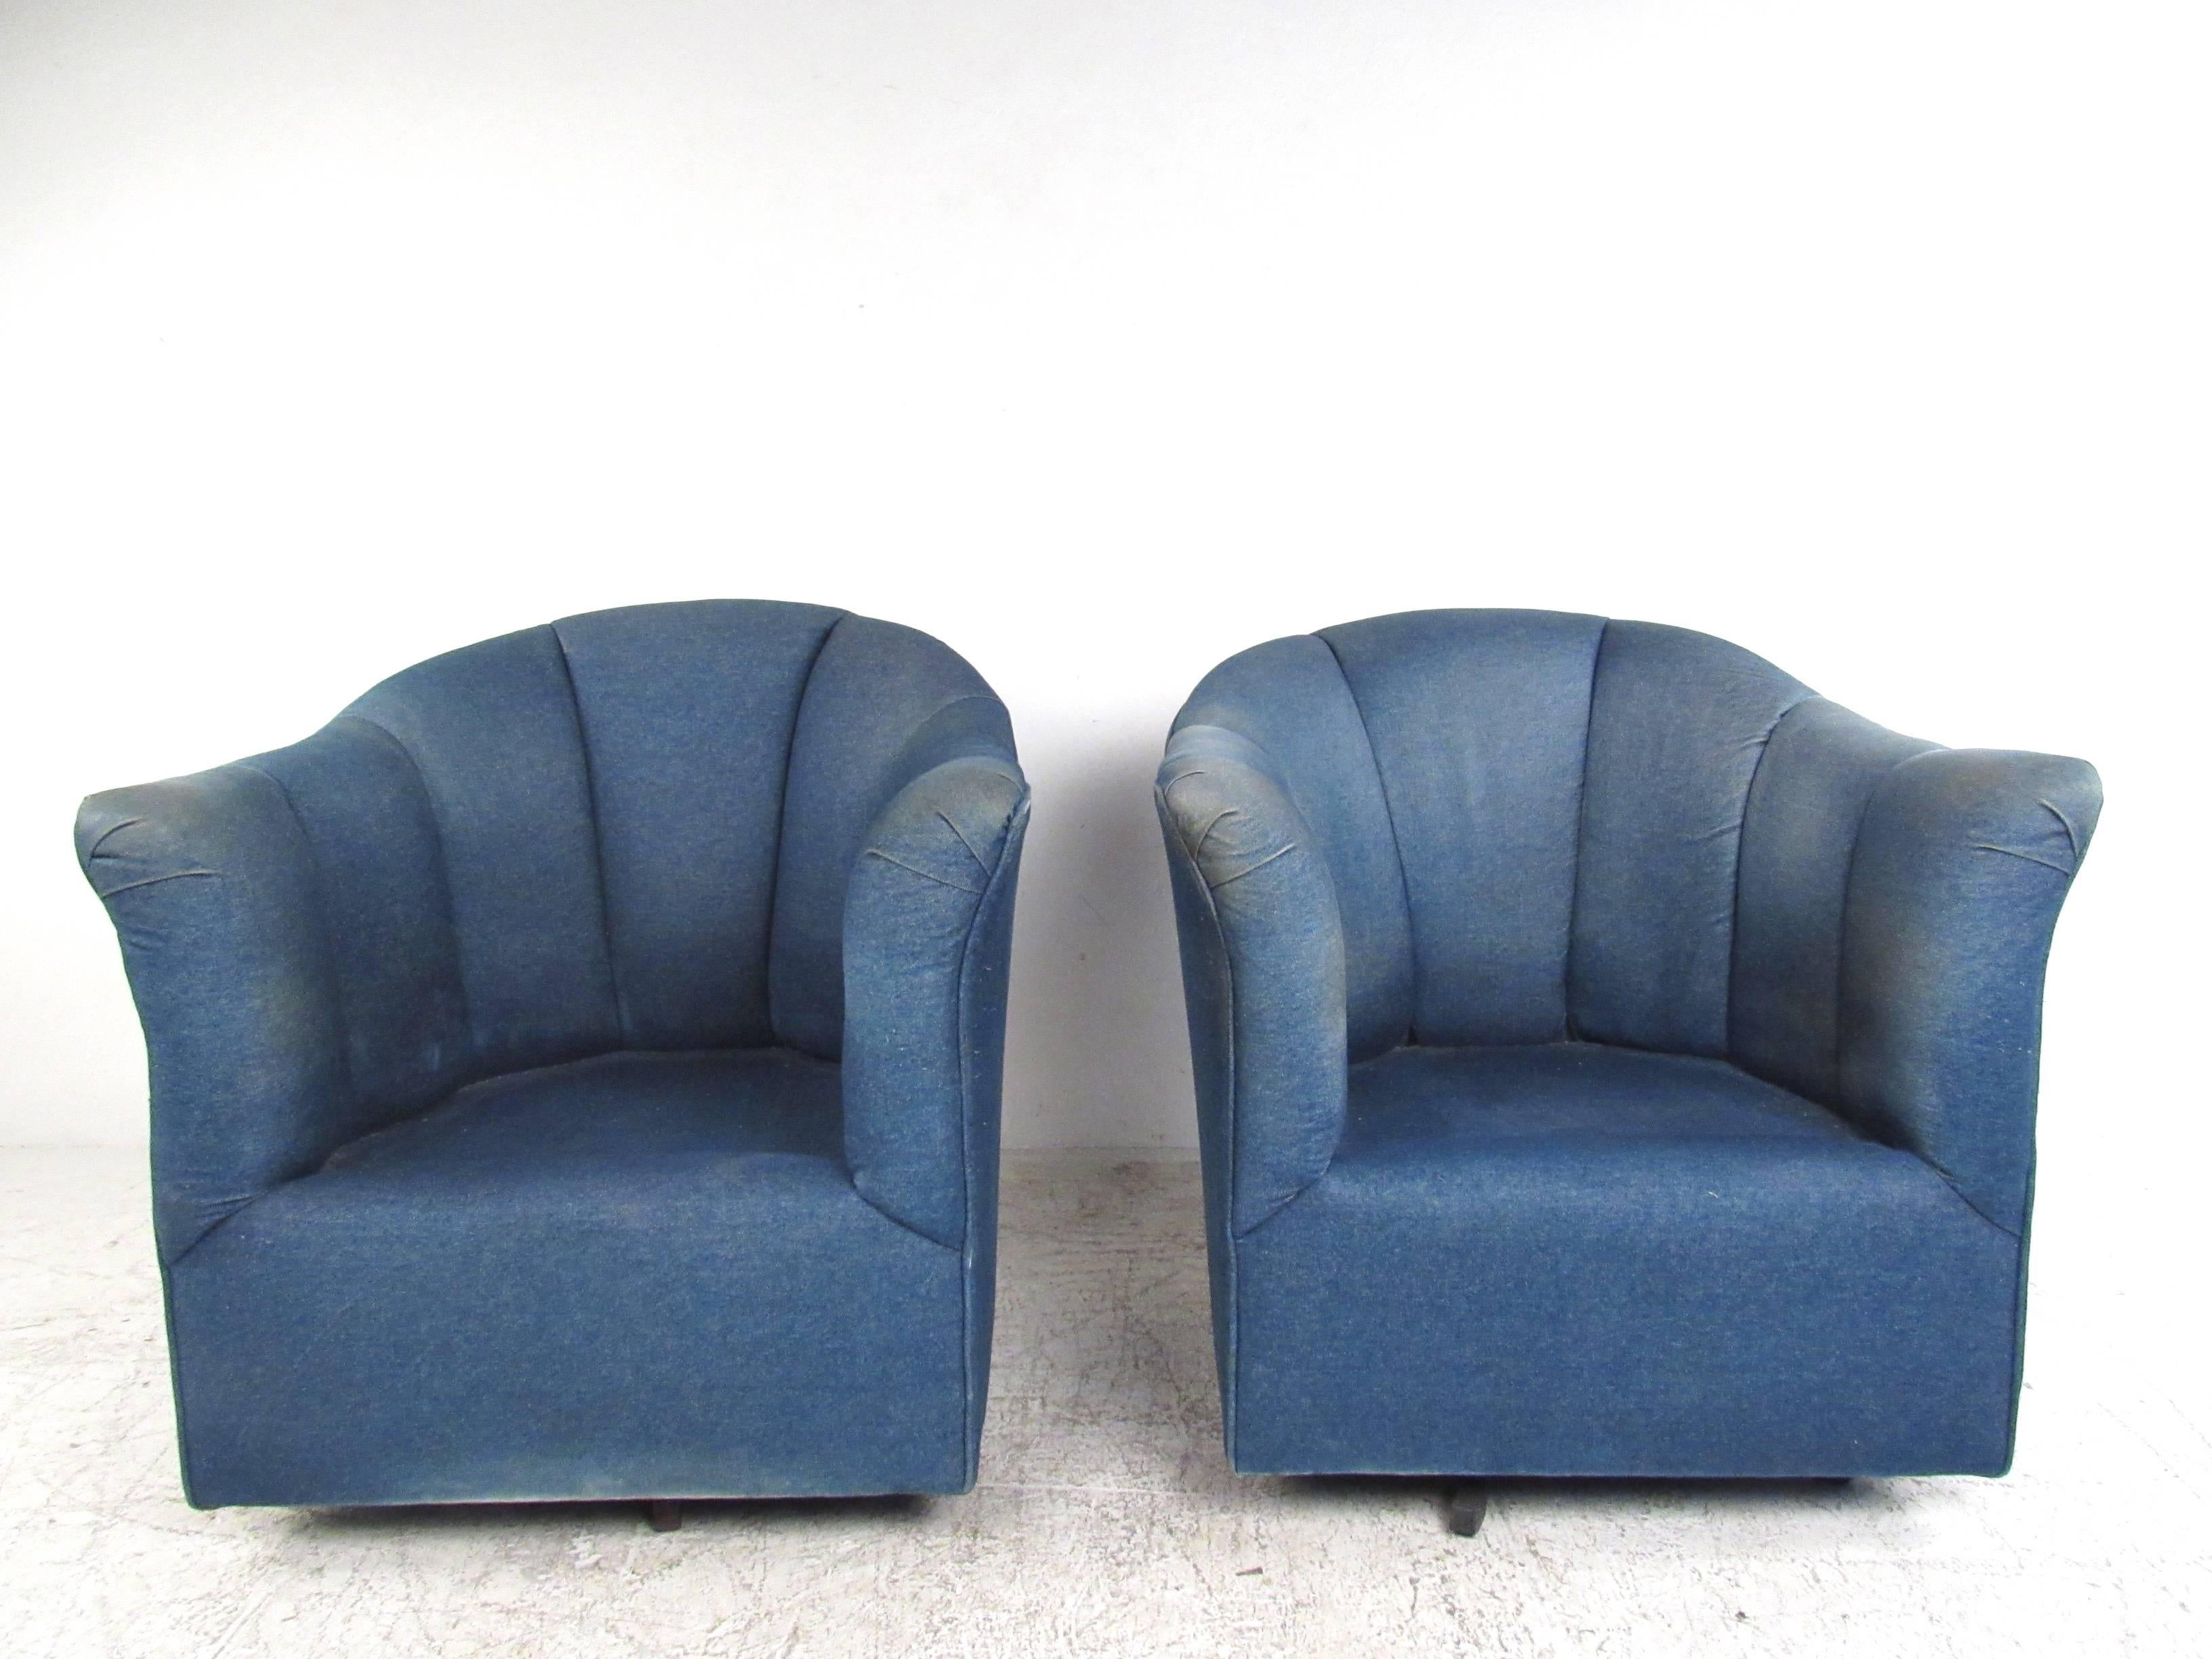 This comfortably upholstered pair of chairs features denim covering, comfortable overstuffed cushioning, and swivel bases. Unique and comfortable pair of chairs suitable for any modern or contemporary setting. Please confirm item location (NY or NJ).